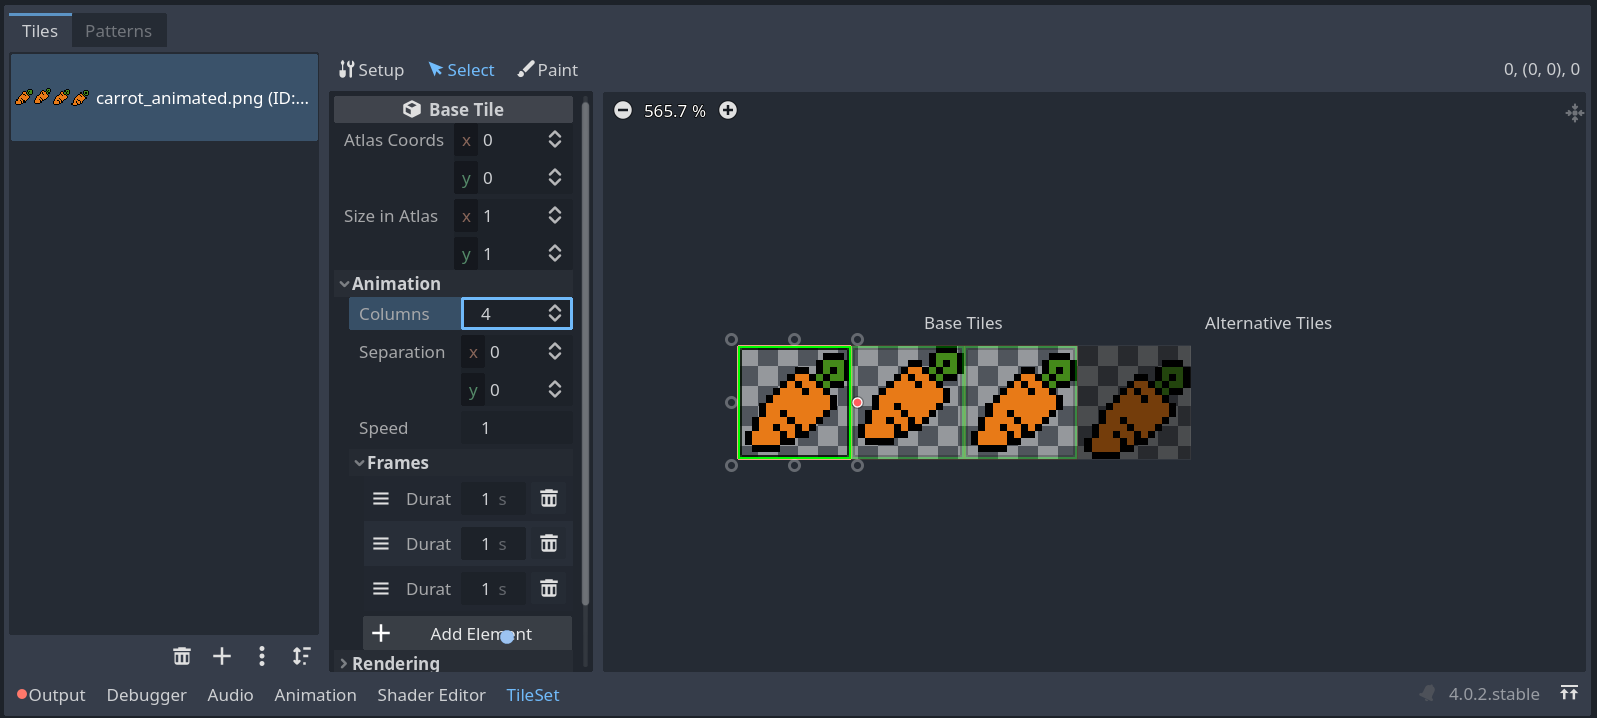 Screenshot of Godot 4&rsquo;s tileset editor, showing the final animation setup on the &ldquo;Select&rdquo; panel as described in the text